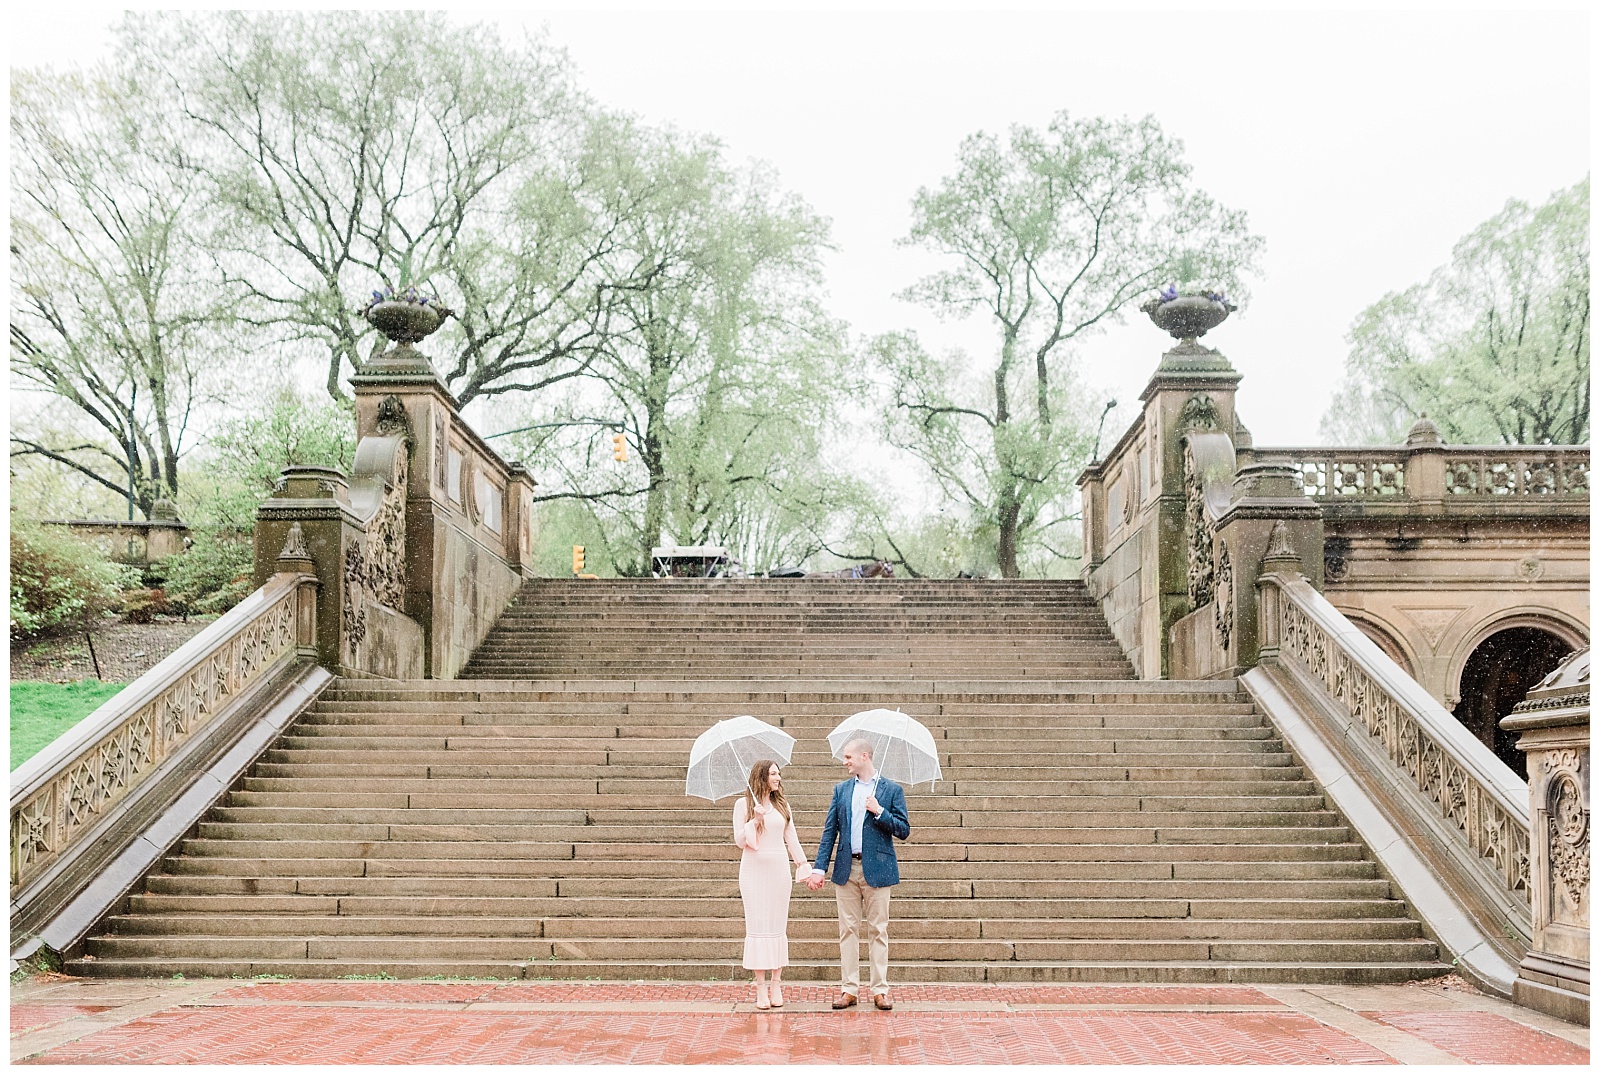 A couple holds hands in front of a large staircase in Central Park NYC.